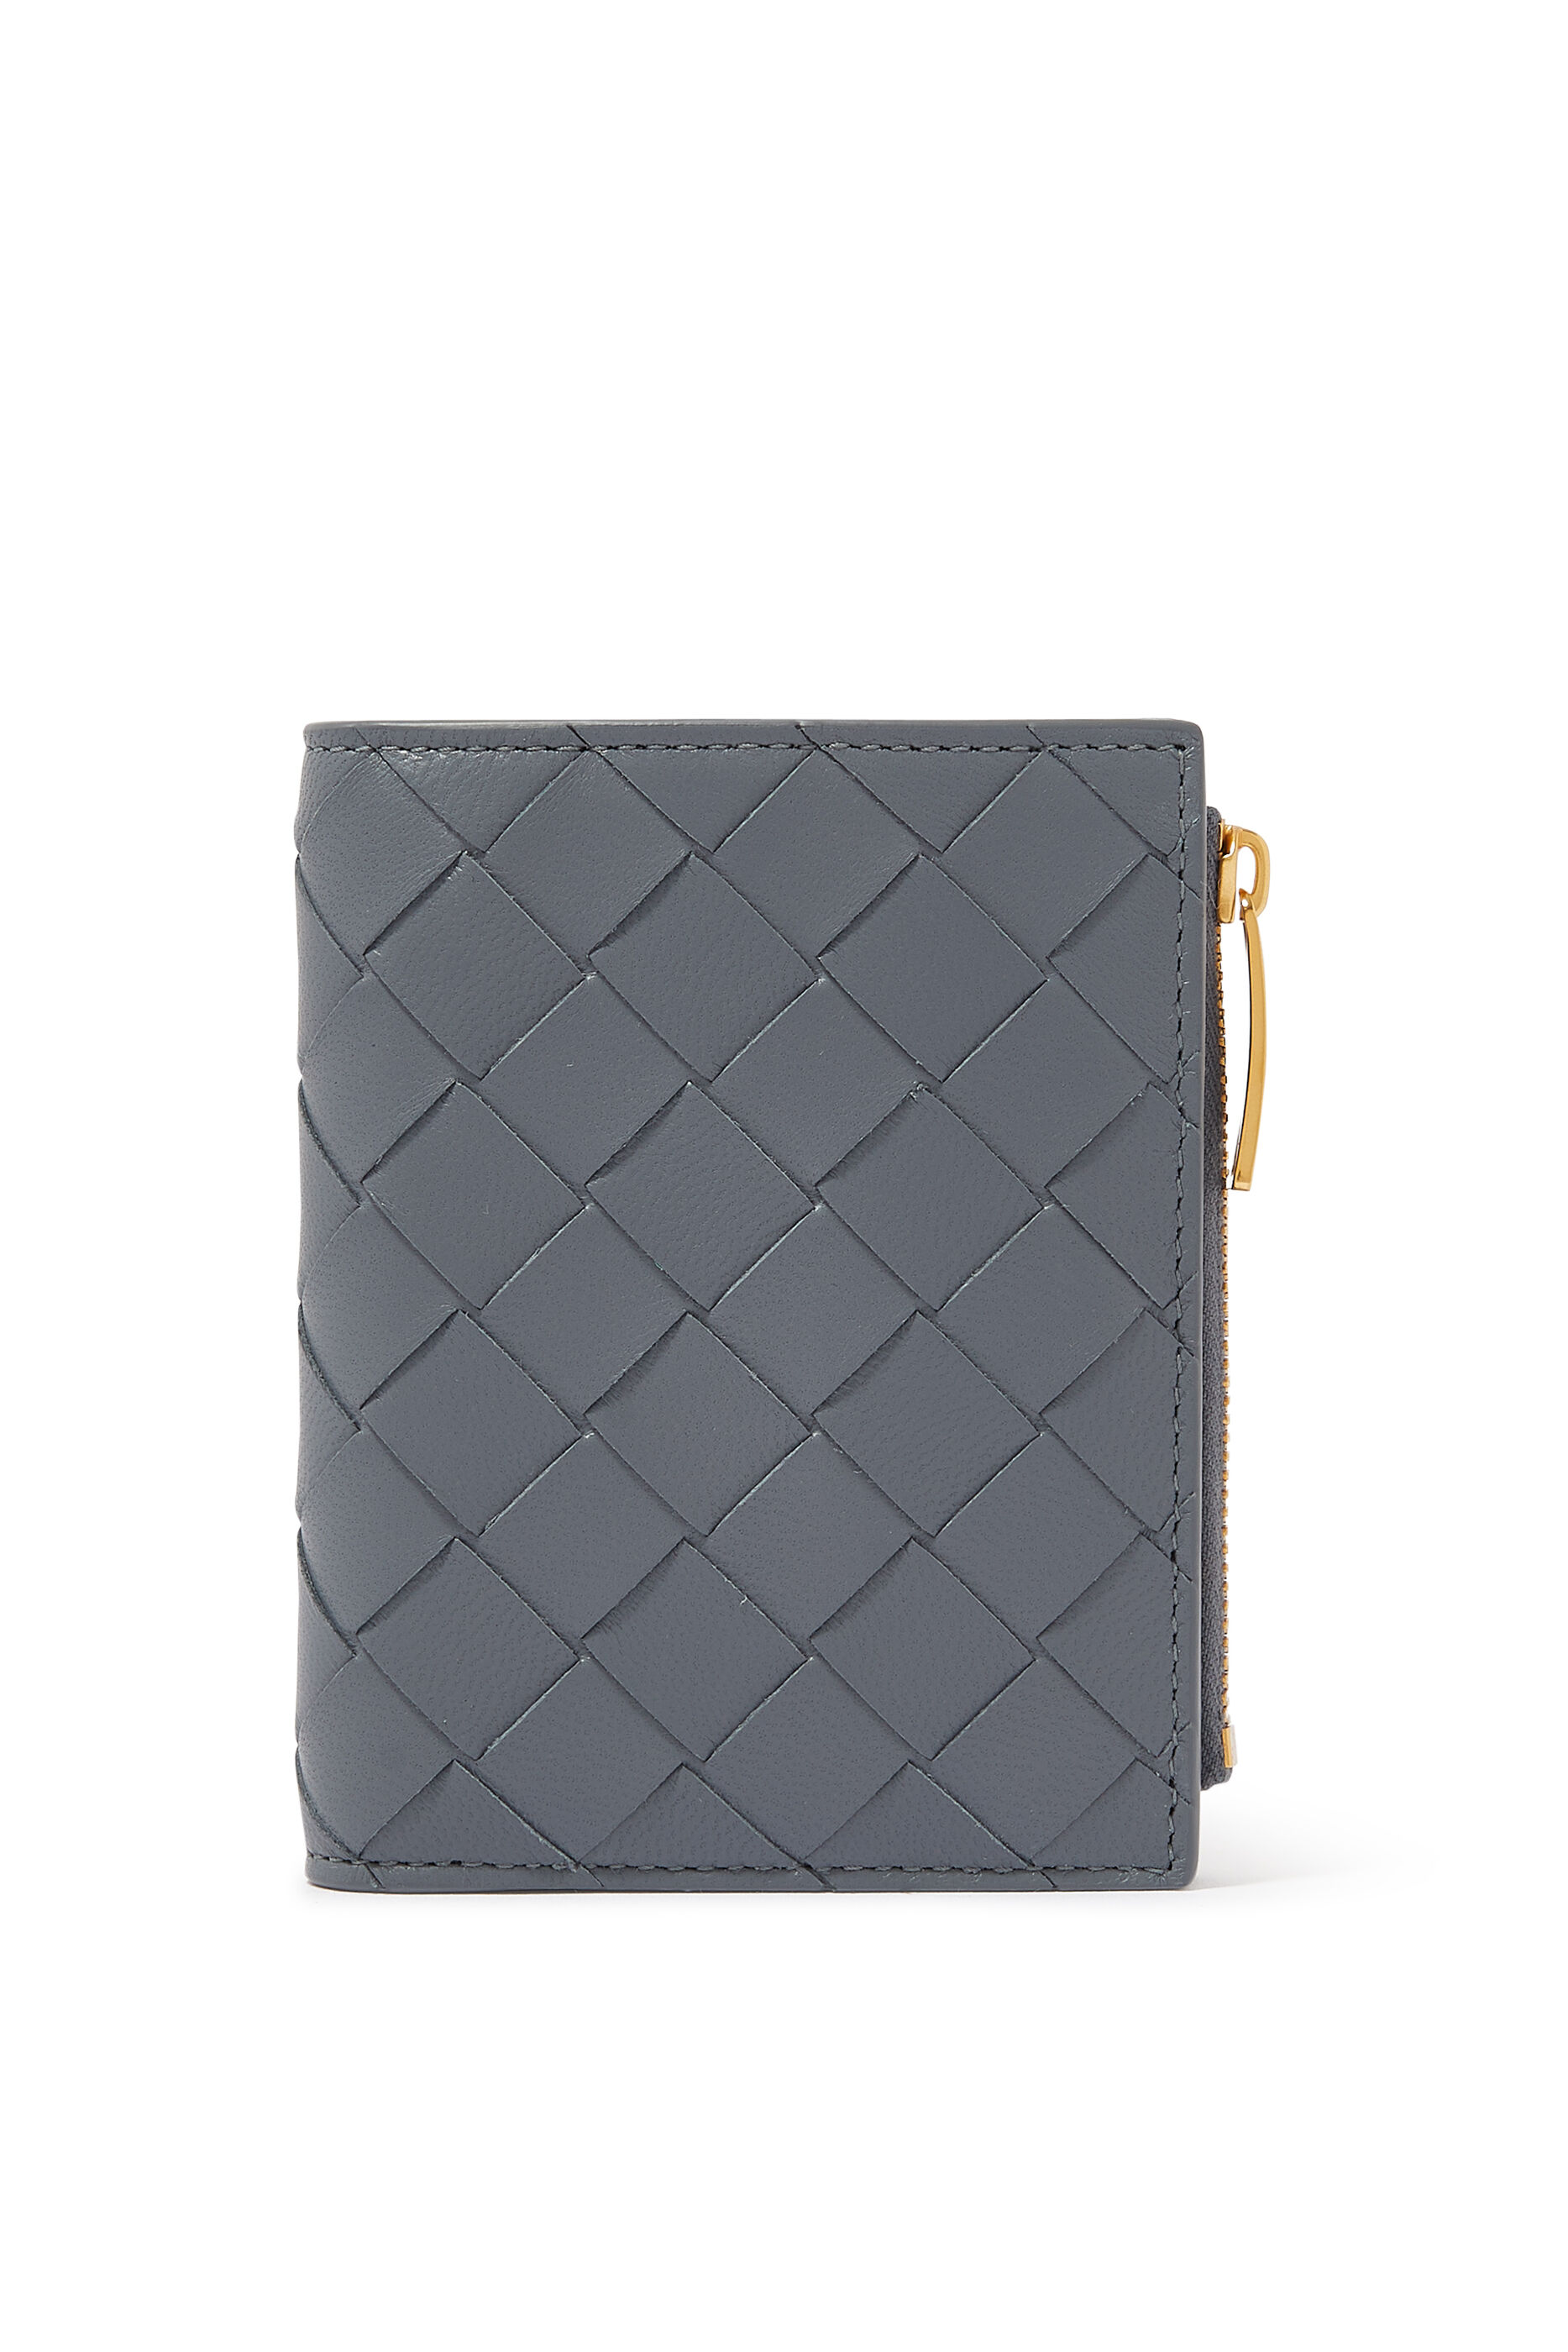 Quilted Leather Bifold Wallet Bloomingdales Women Accessories Bags Purses 